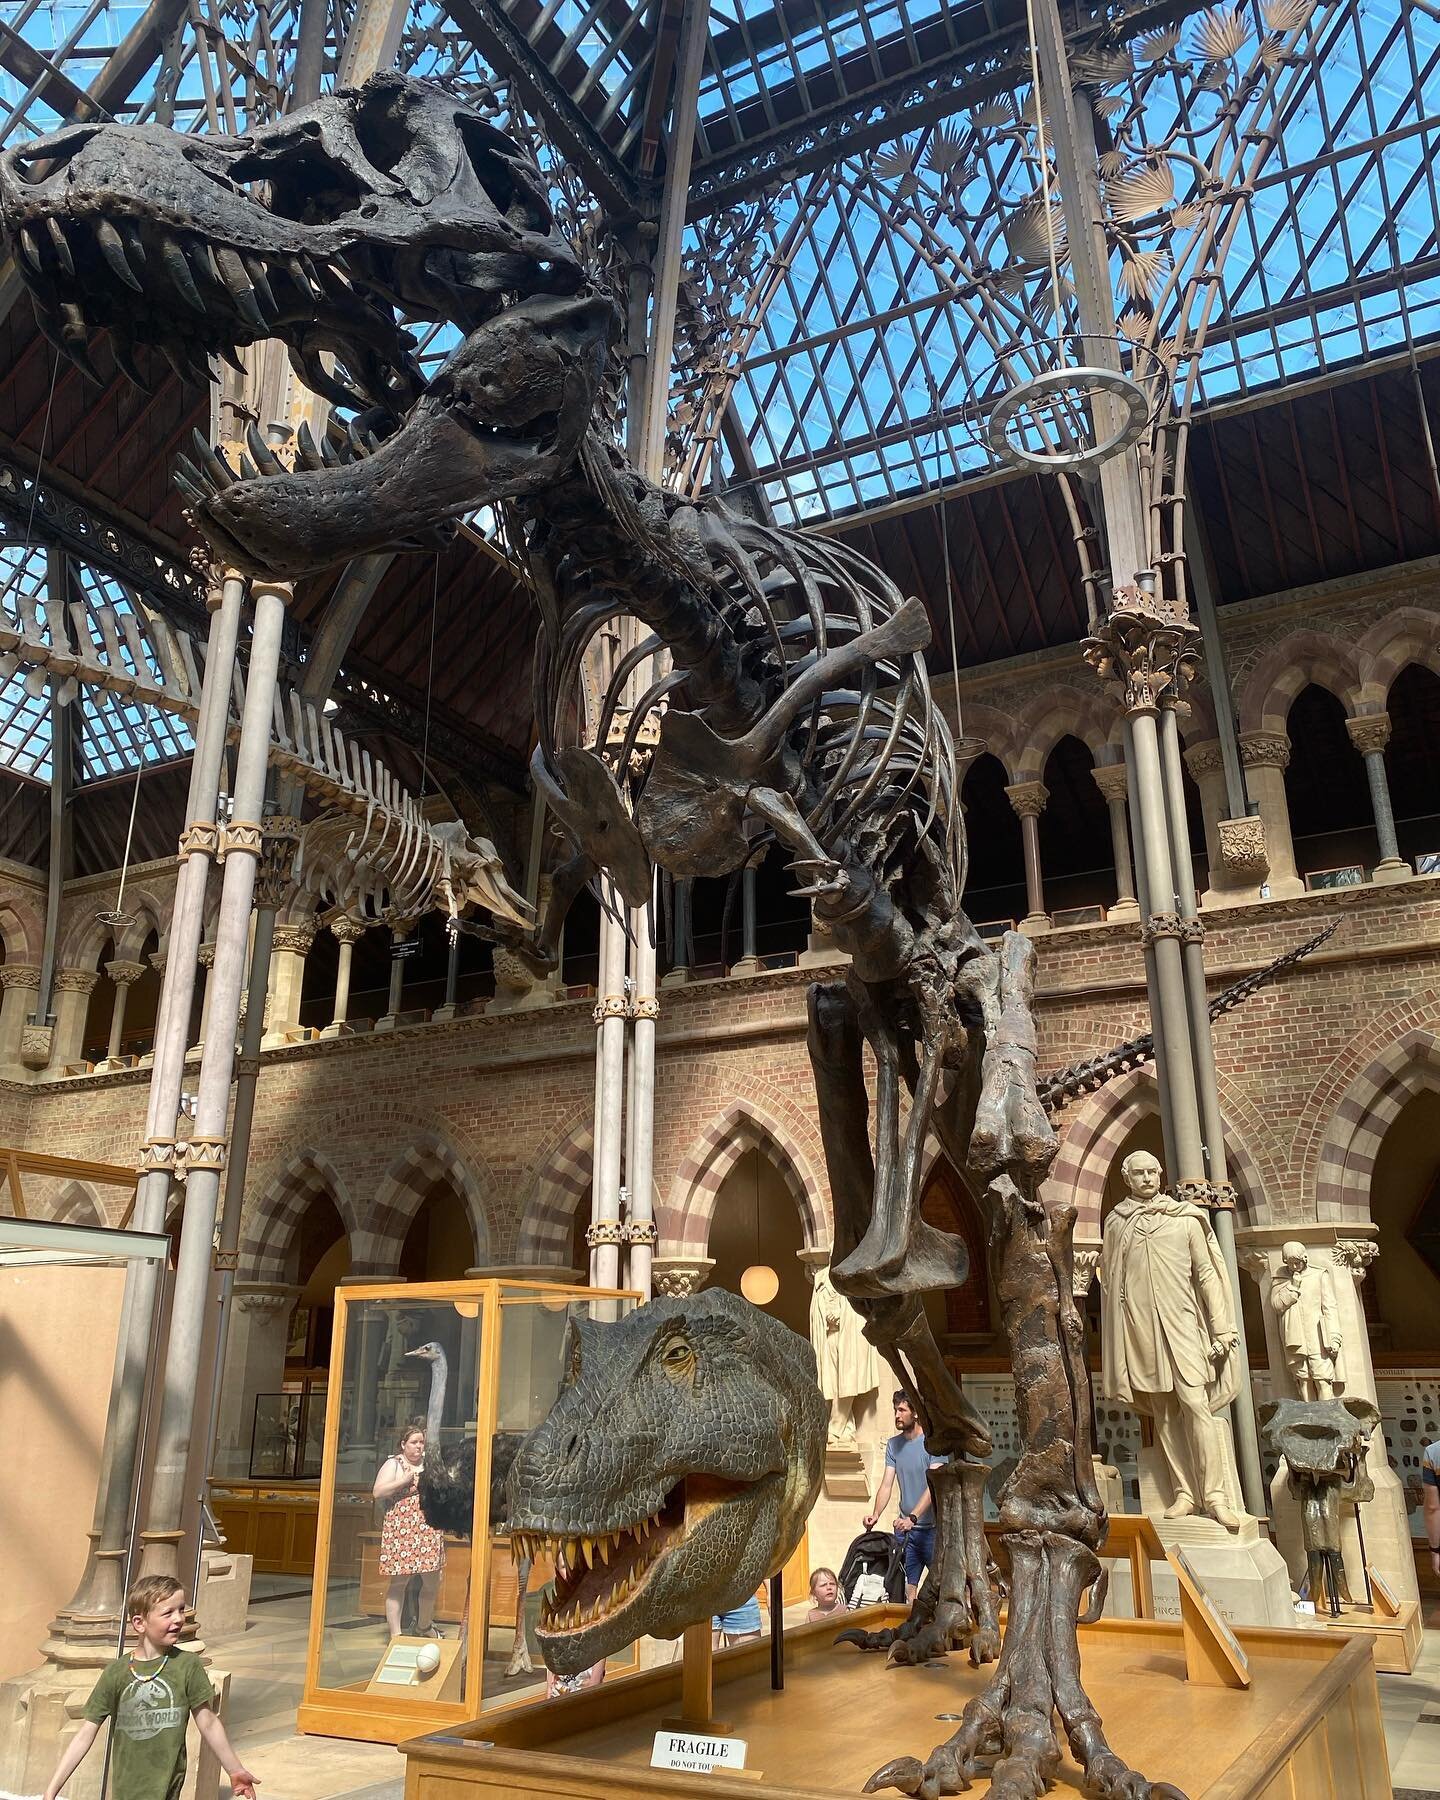 Dinos in Oxford! Needless to say, I was pretty stoked 😁🦖
&bull;
Check out: @morethanadodo 🏛
&bull;
1/5: T. rex
2/5: Iguanodon
3/5: Edmontosaurus
4/5: Struthiomimus
5/5: 📸 by @bombnattanon
&bull;
&bull;
#dinosaur #fossil #science #museum #naturalh